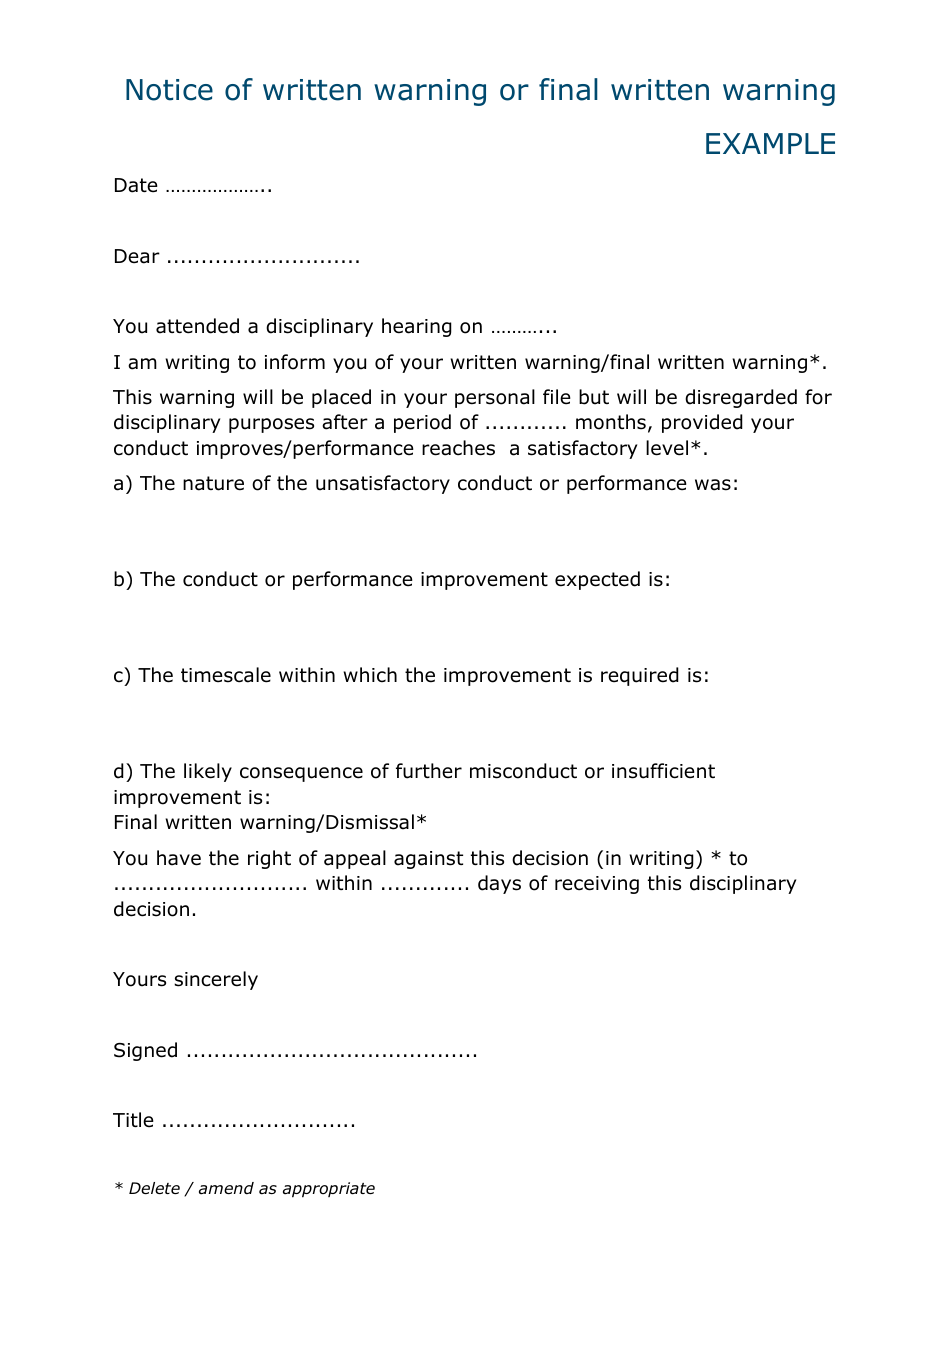 how-to-write-a-warning-letter-for-misconduct-download-this-final-warning-letter-for-misconduct